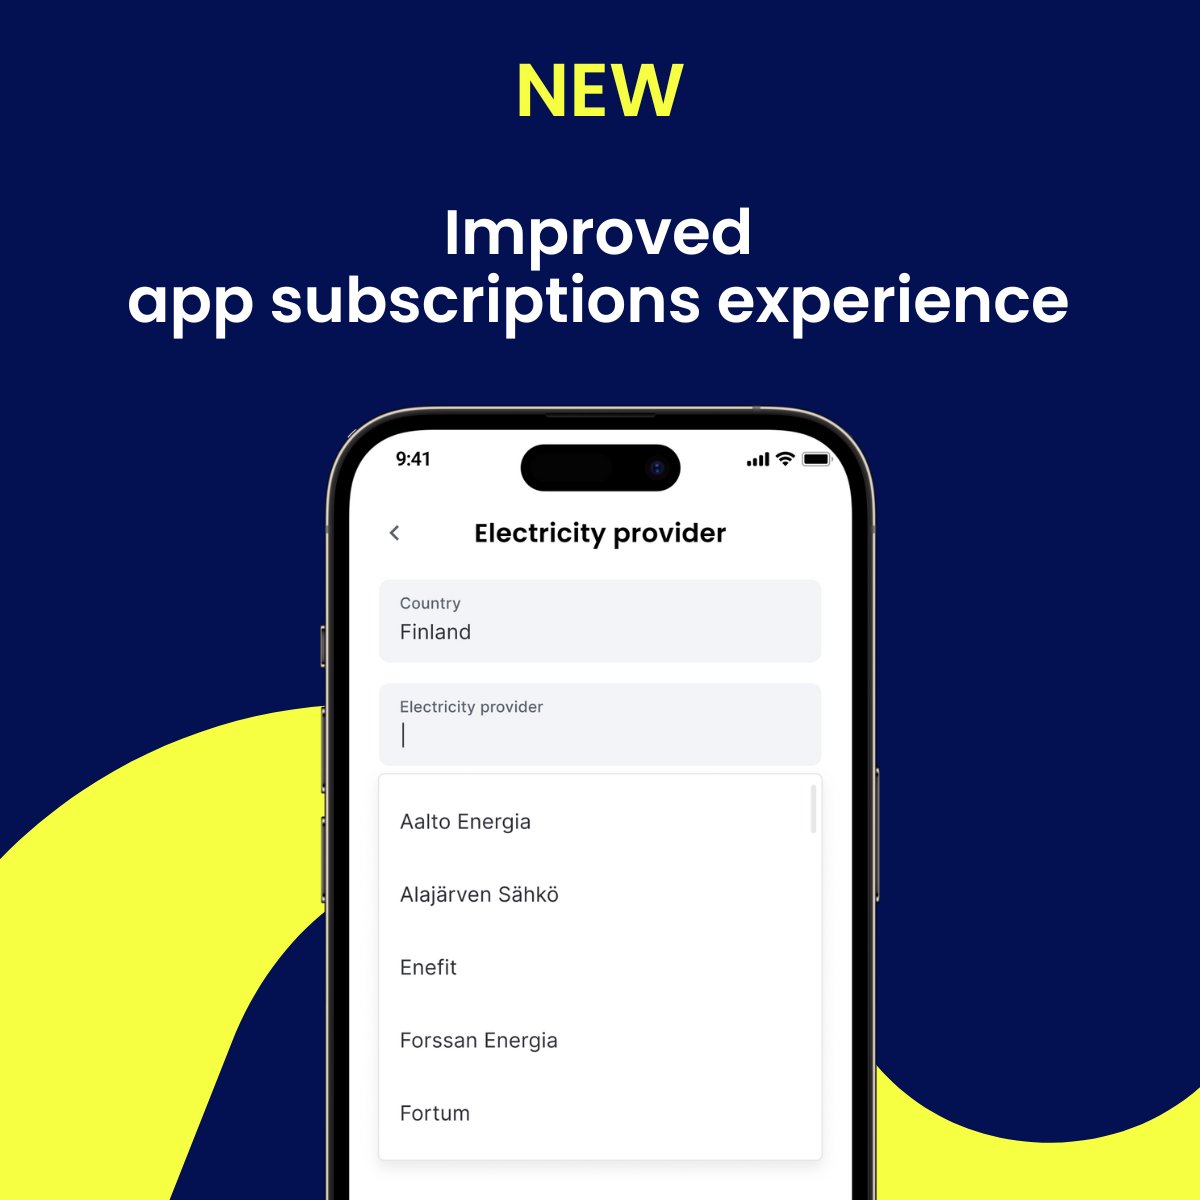 New changelog 🛠

› Users can now easily switch electricity providers in the app and enjoy a more personalized experience if their provider is a Synergi partner. 

📌eu1.hubs.ly/H08PwRg0

#smartenergyapp #smartenergy #demandresponse #flexibility